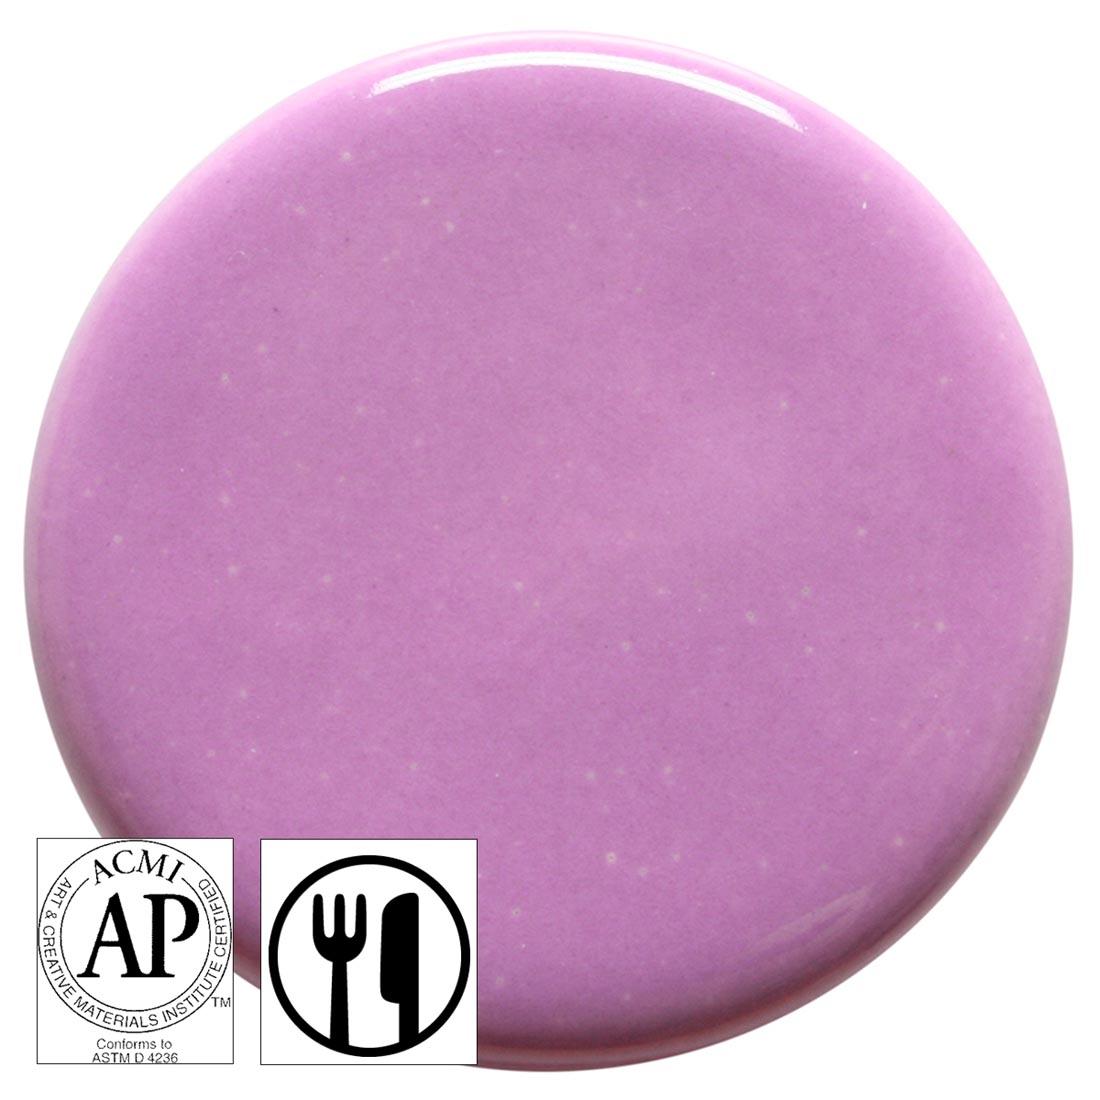 clay tile with Lilac AMACO Teacher's Palette Gloss Glaze applied; symbols for AP Seal and food safe